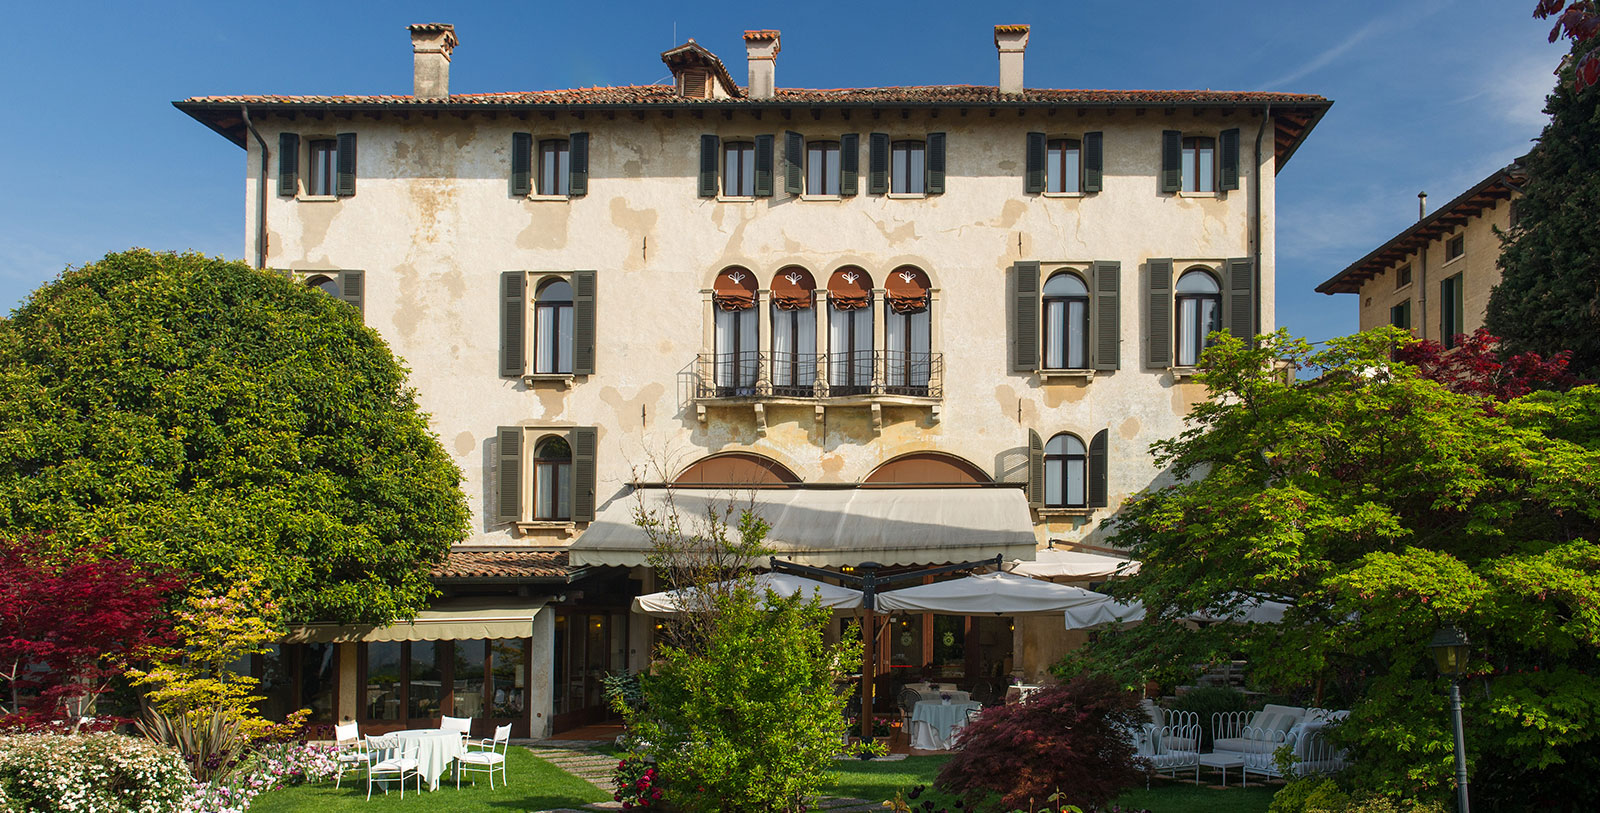 Image of Garden Hotel Villa Cipriani, 1889, Member of Historic Hotels Worldwide, in Asolo, Italy, Overview